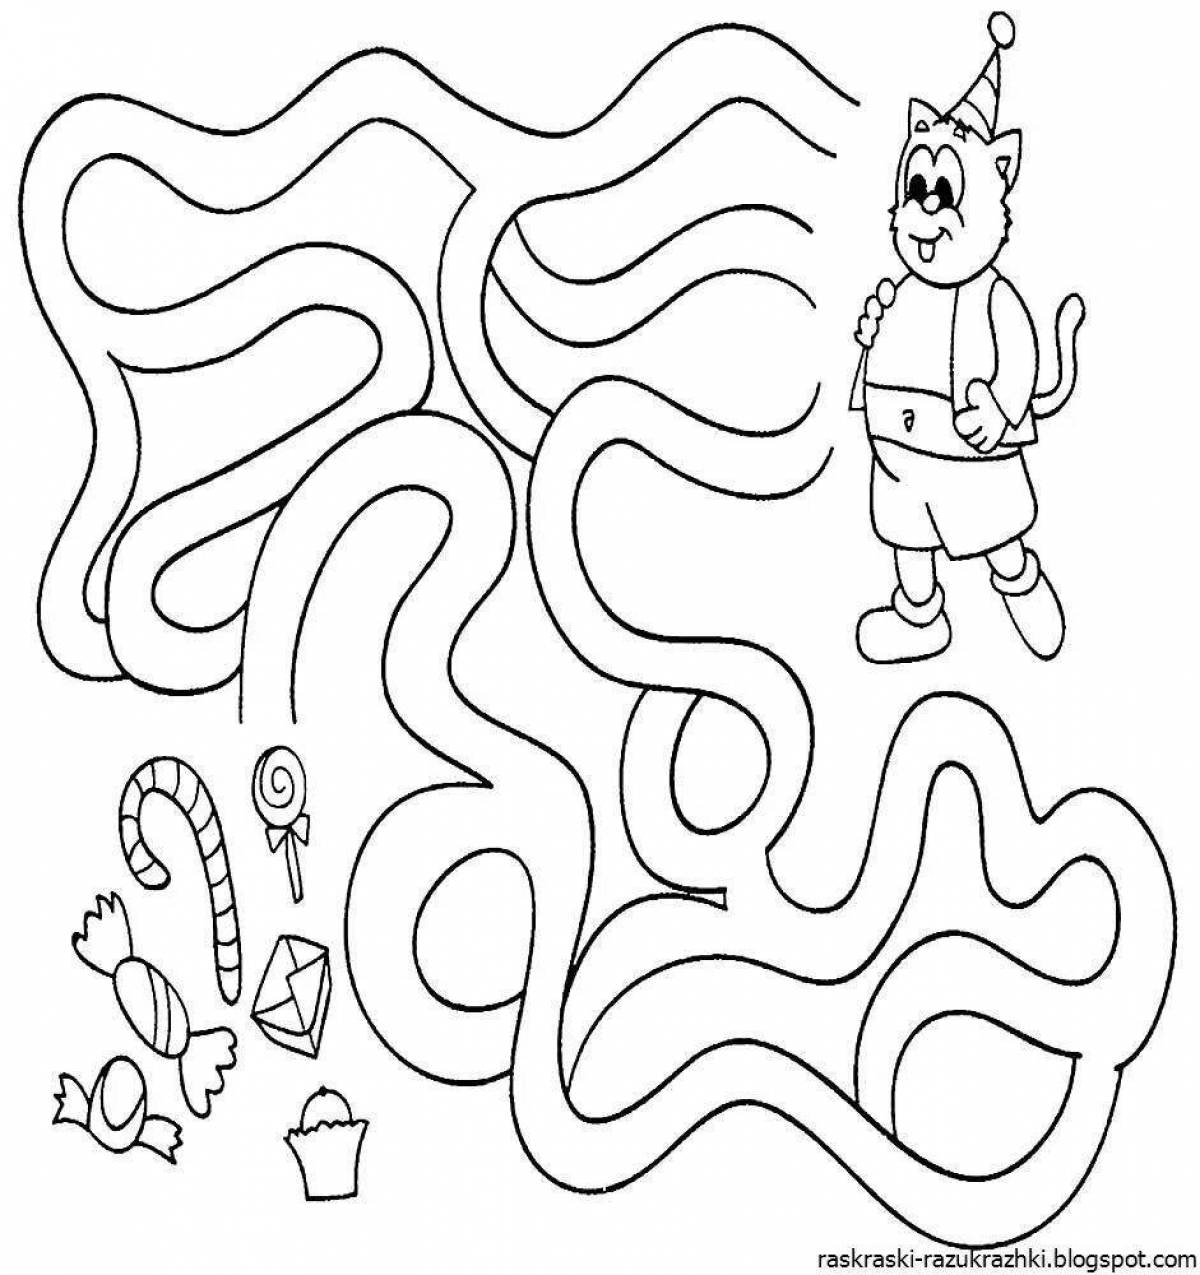 Colorful coloring game for children 5 years old